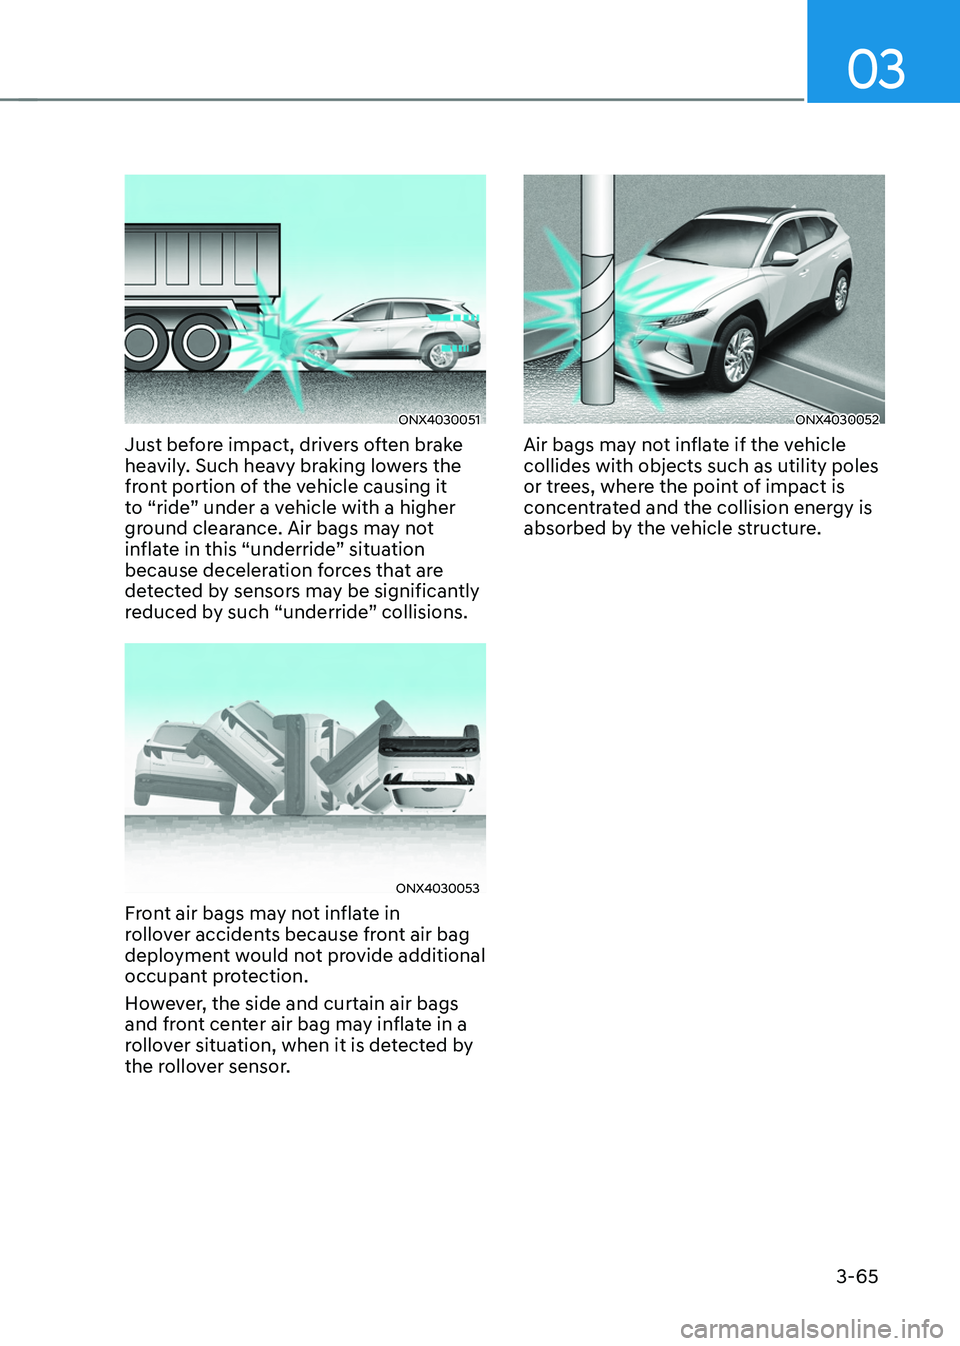 HYUNDAI TUCSON 2022  Owners Manual 03
3-65
ONX4030051
Just before impact, drivers often brake 
heavily. Such heavy braking lowers the 
front portion of the vehicle causing it 
to “ride” under a vehicle with a higher 
ground clearan